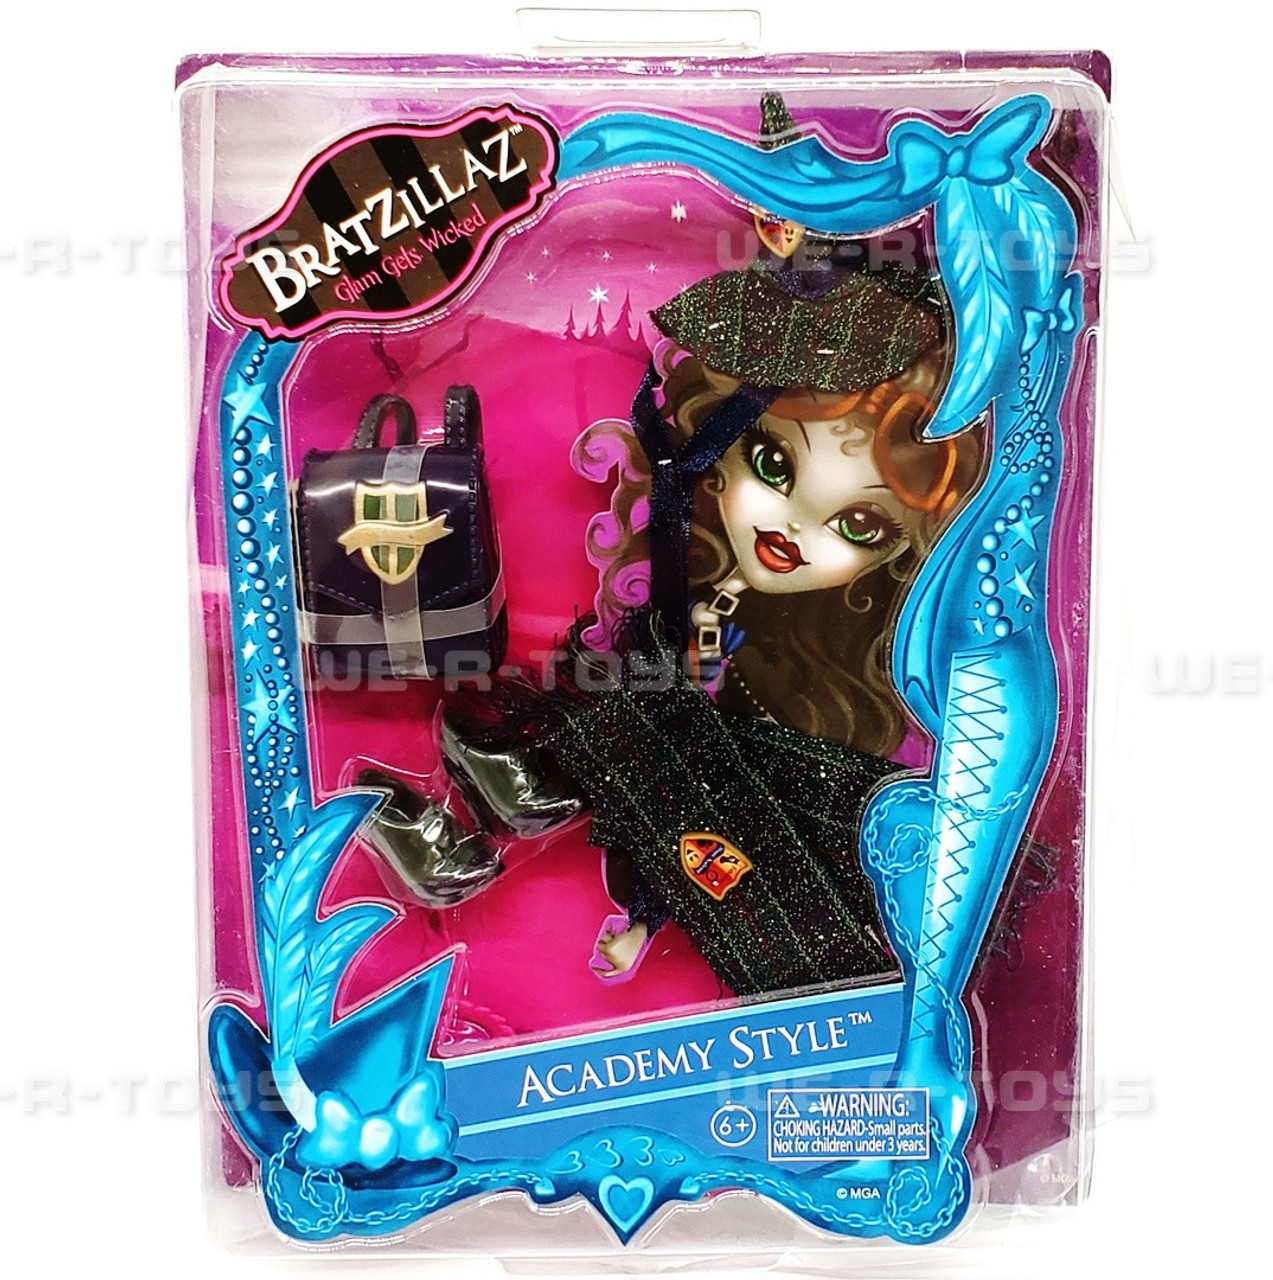 https://cdn11.bigcommerce.com/s-cy4lua1xoh/images/stencil/1280x1280/products/27625/245567/bratzillaz-academy-style-fashion-accessory-pack-mga-entertainment-517368__91613.1689712703.jpg?c=1